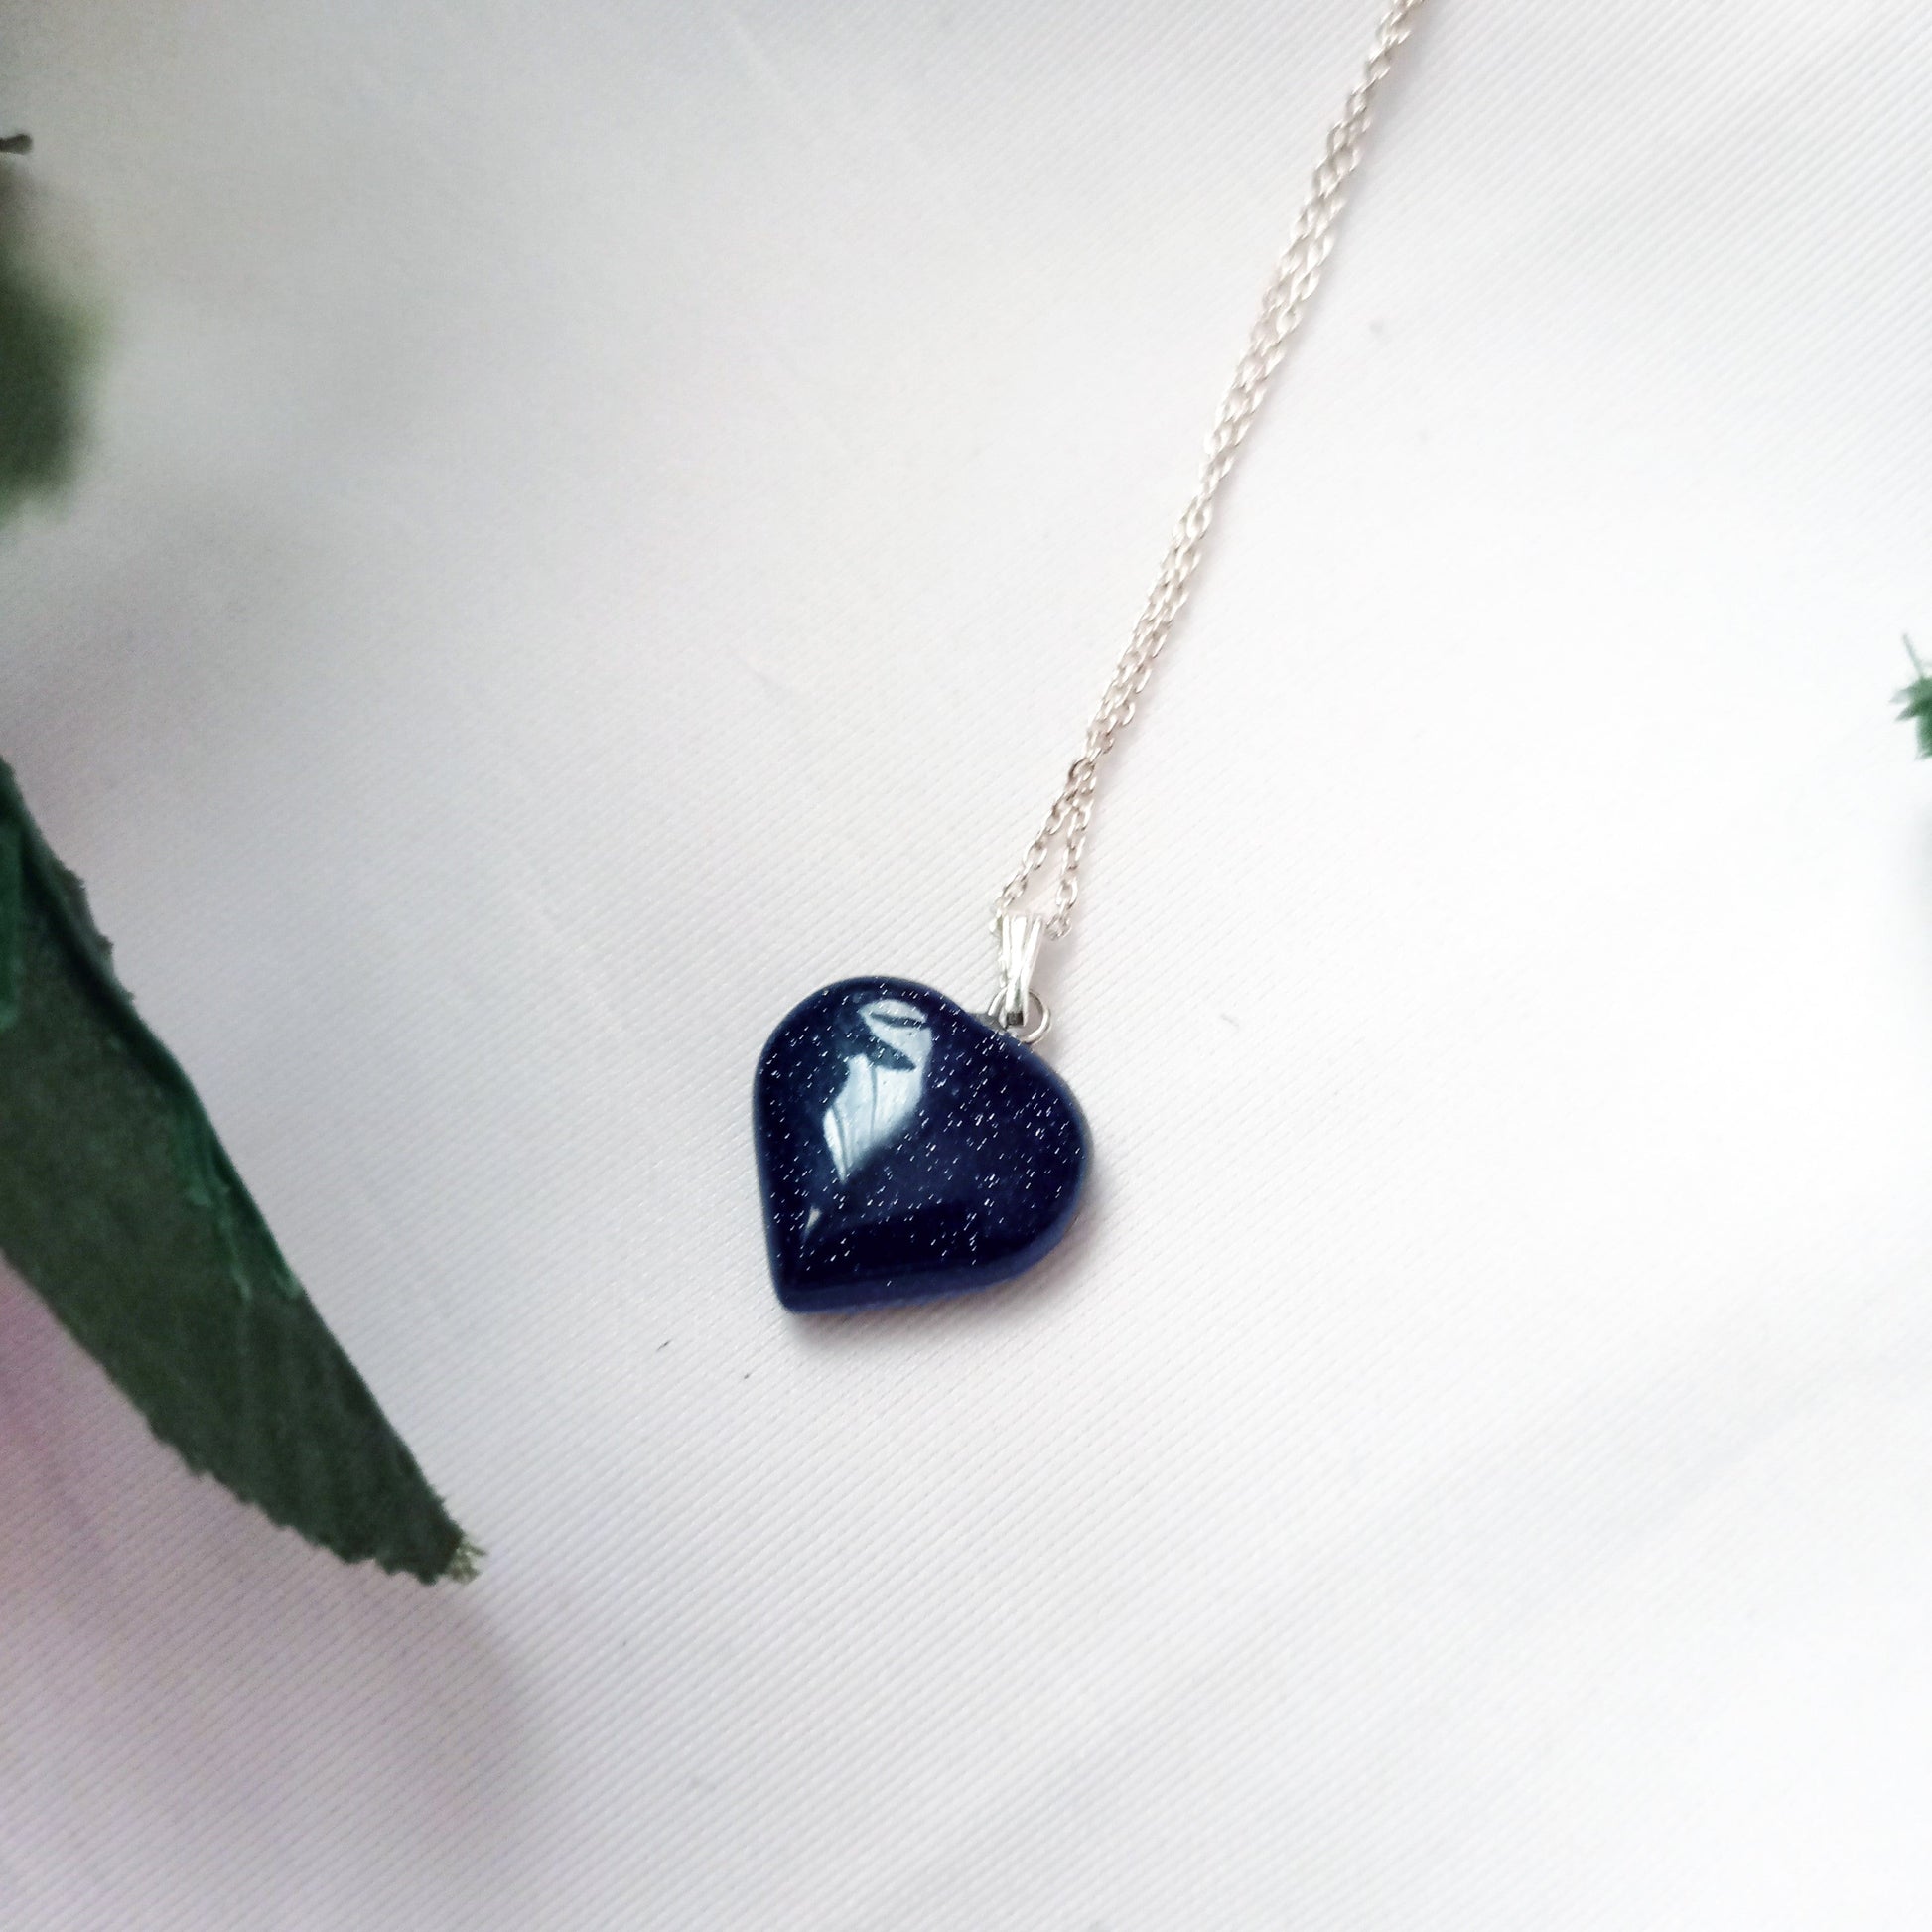 Blue Goldstone Sterling Silver Necklace, Heart Pendant Necklace, Gemstone Necklace, Sterling Silver Necklace | by nlanlaVictory-0